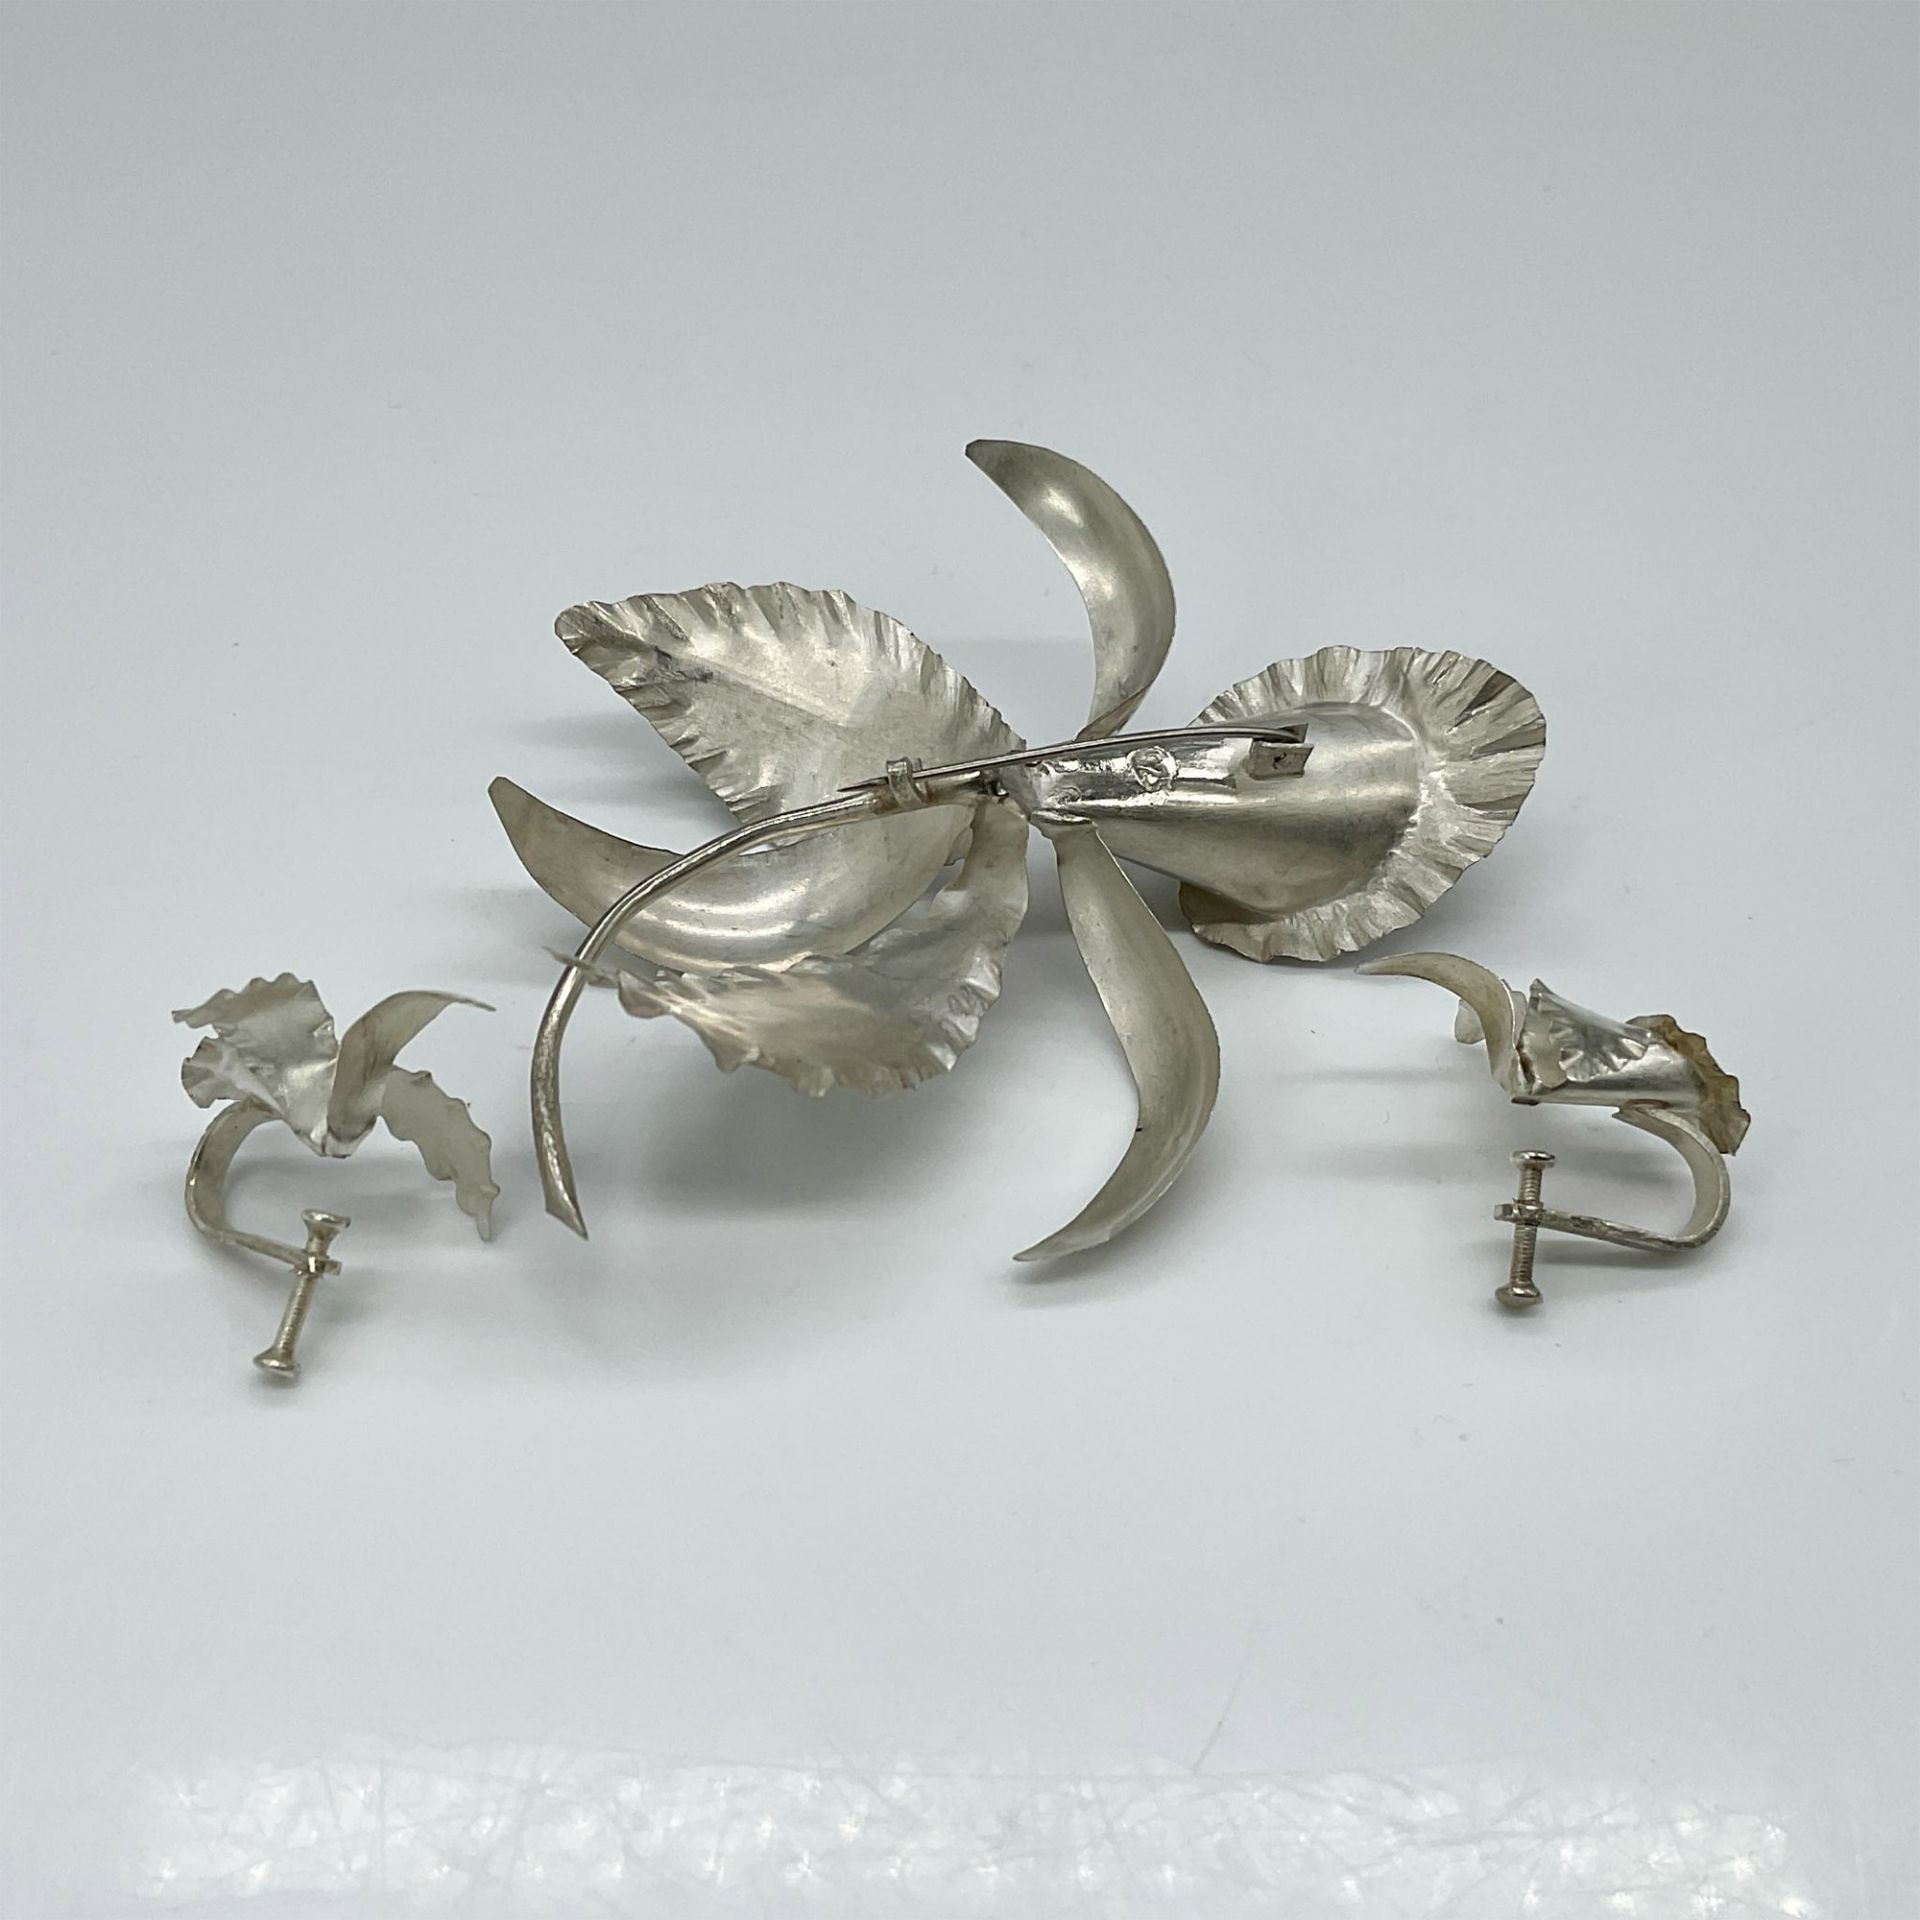 3pc Vintage Sterling Silver Orchid Brooch and Earring Set - Image 2 of 3